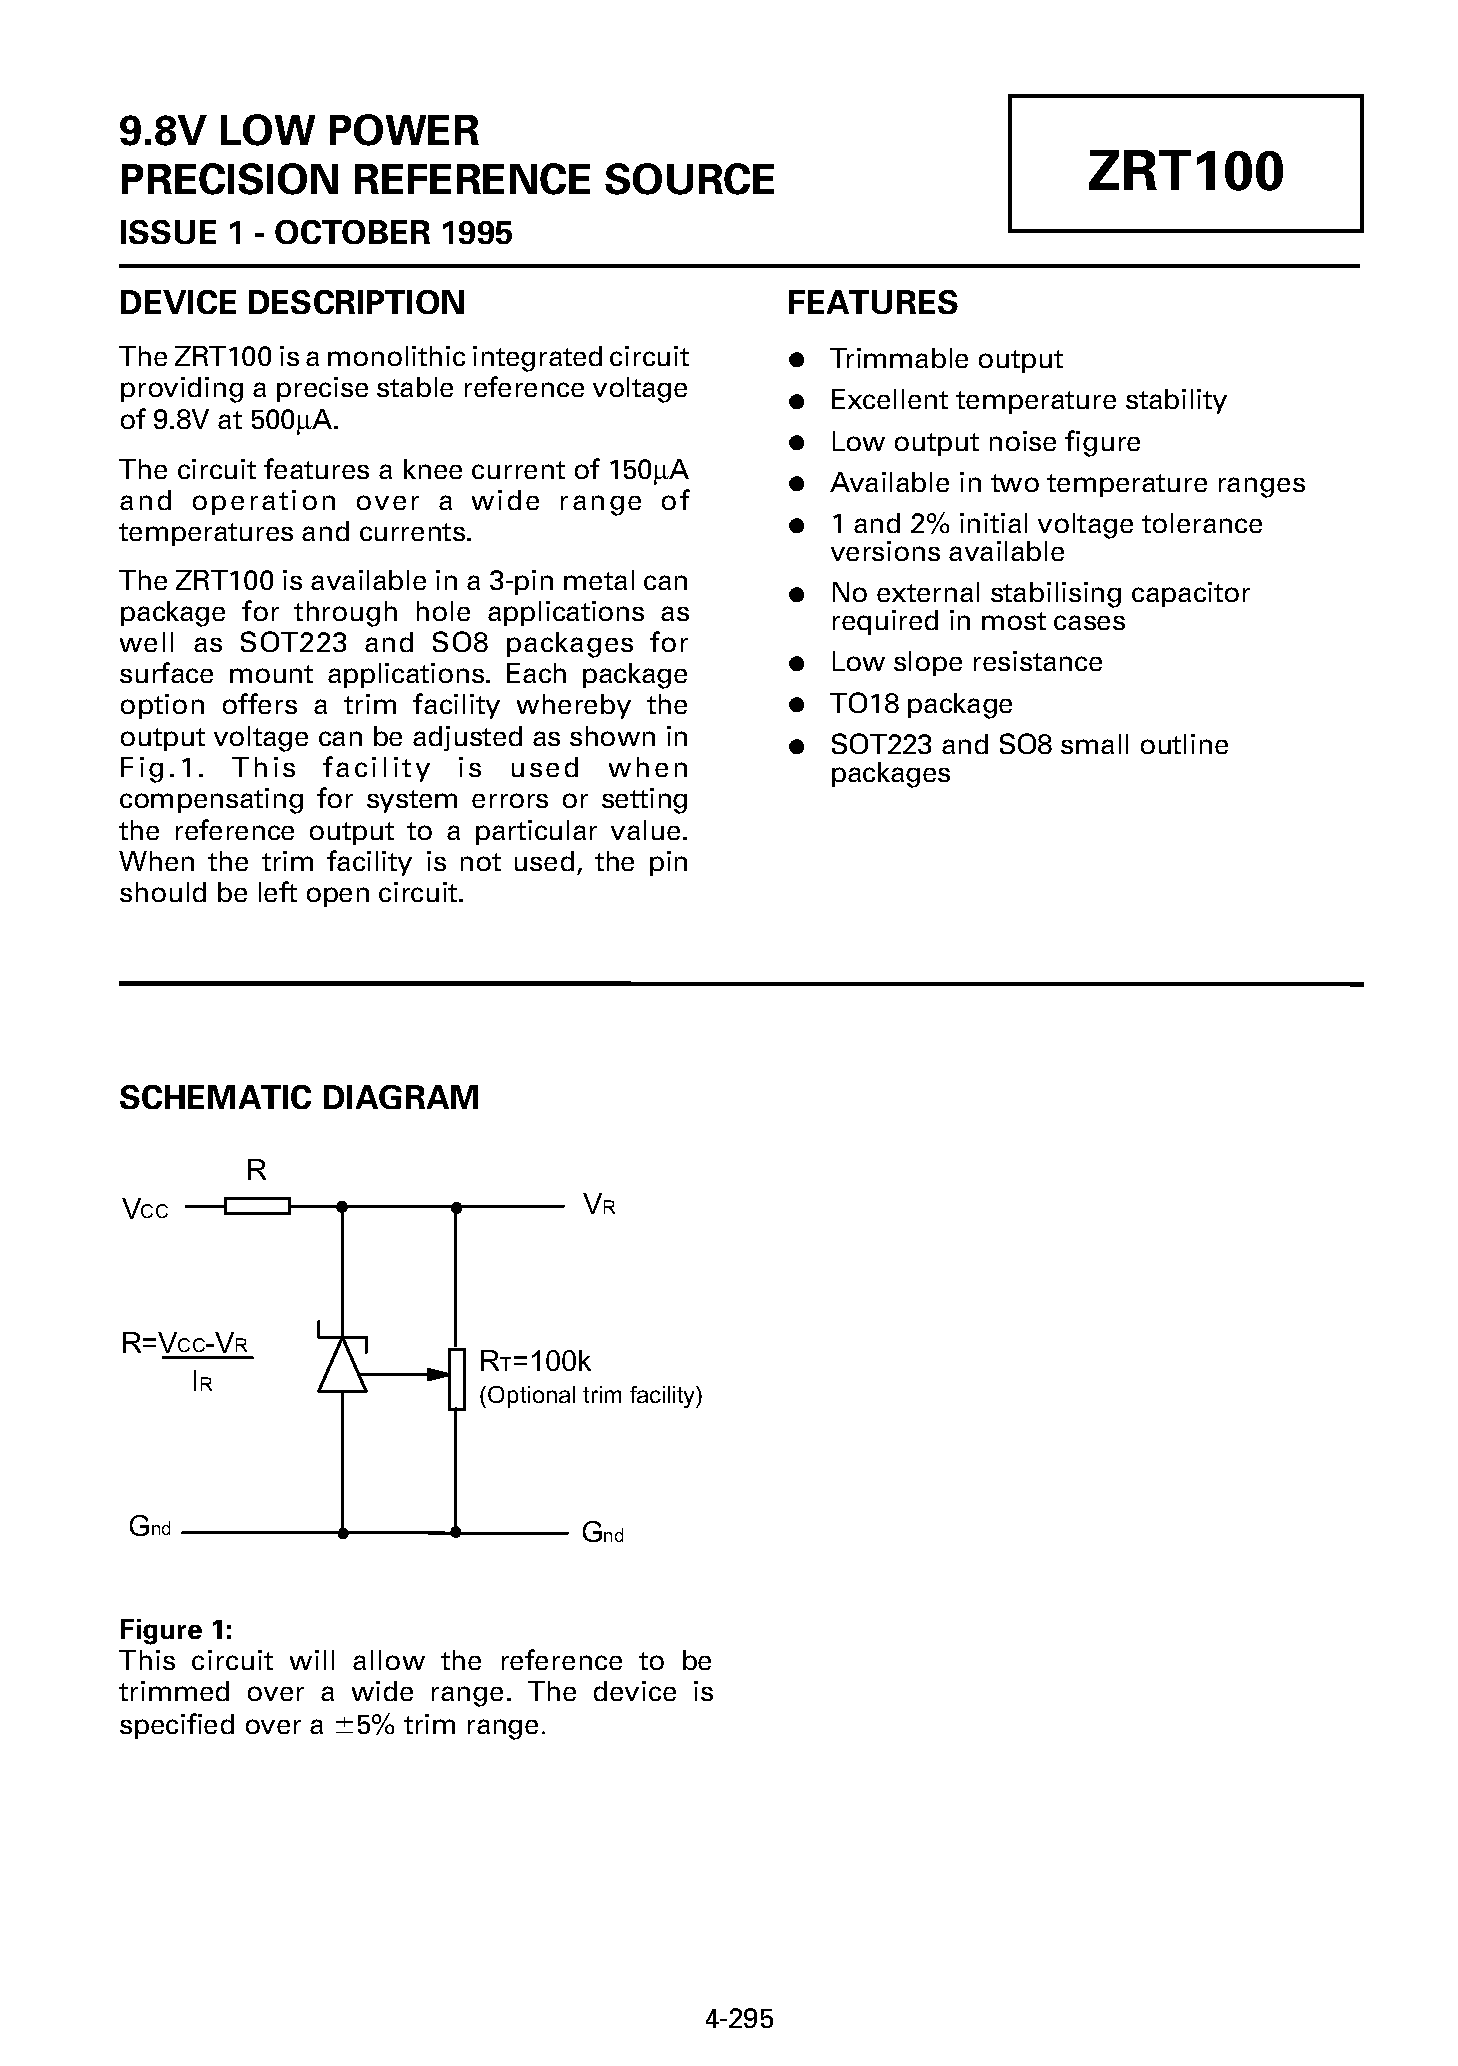 Datasheet ZRT100C2 - 9.8V LOW POWER PRECISION REFERENCE SOURCE page 1